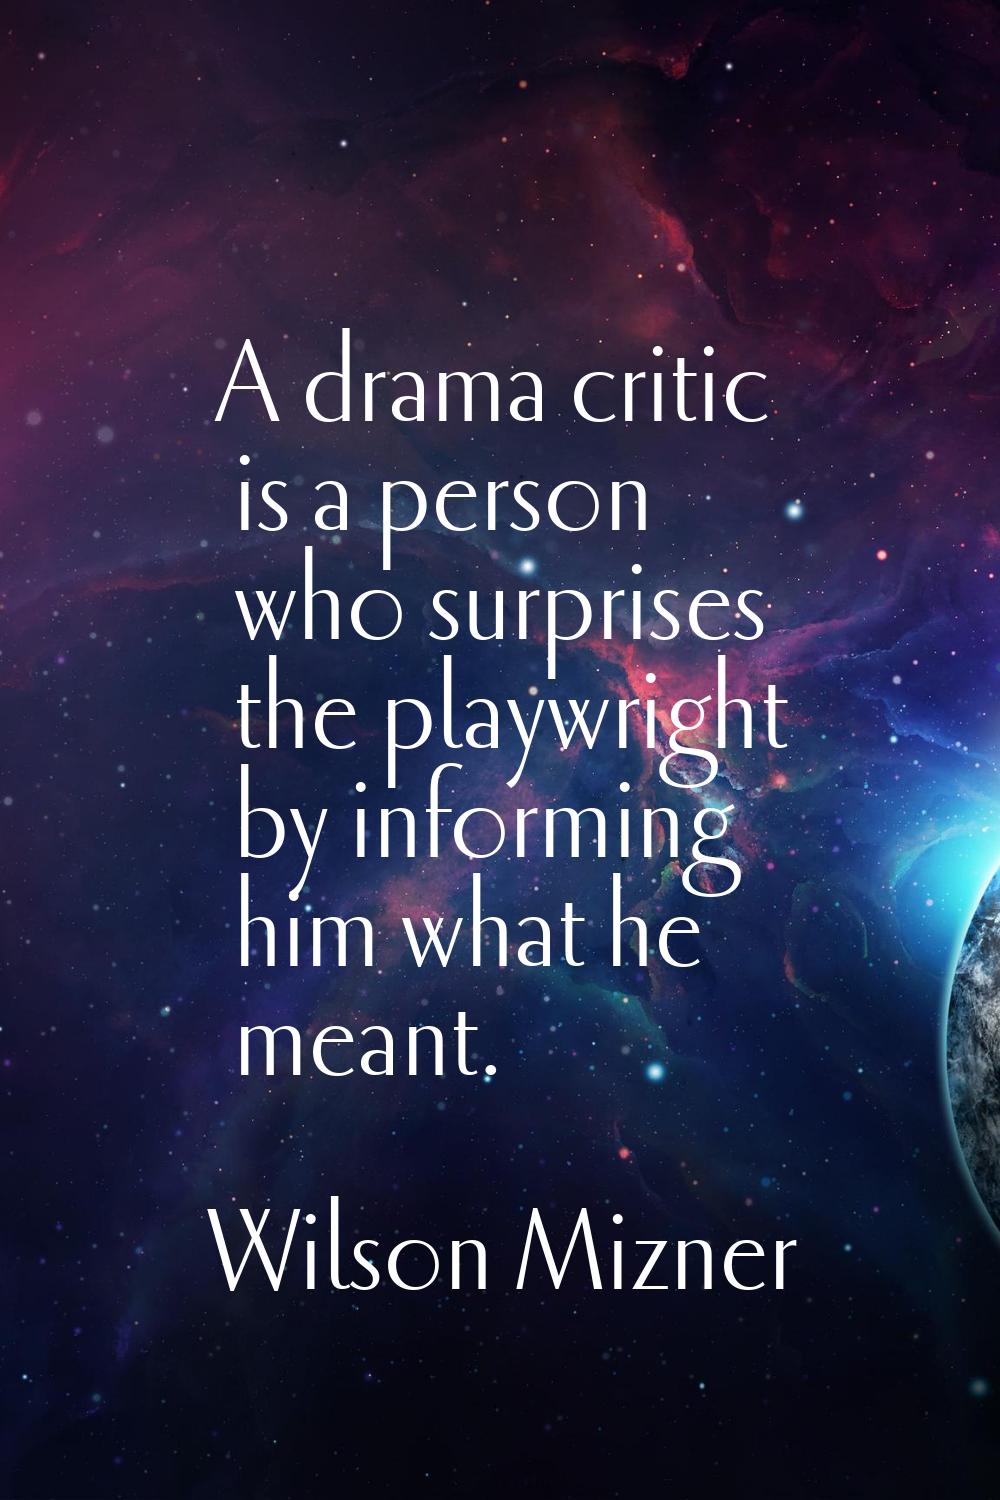 A drama critic is a person who surprises the playwright by informing him what he meant.